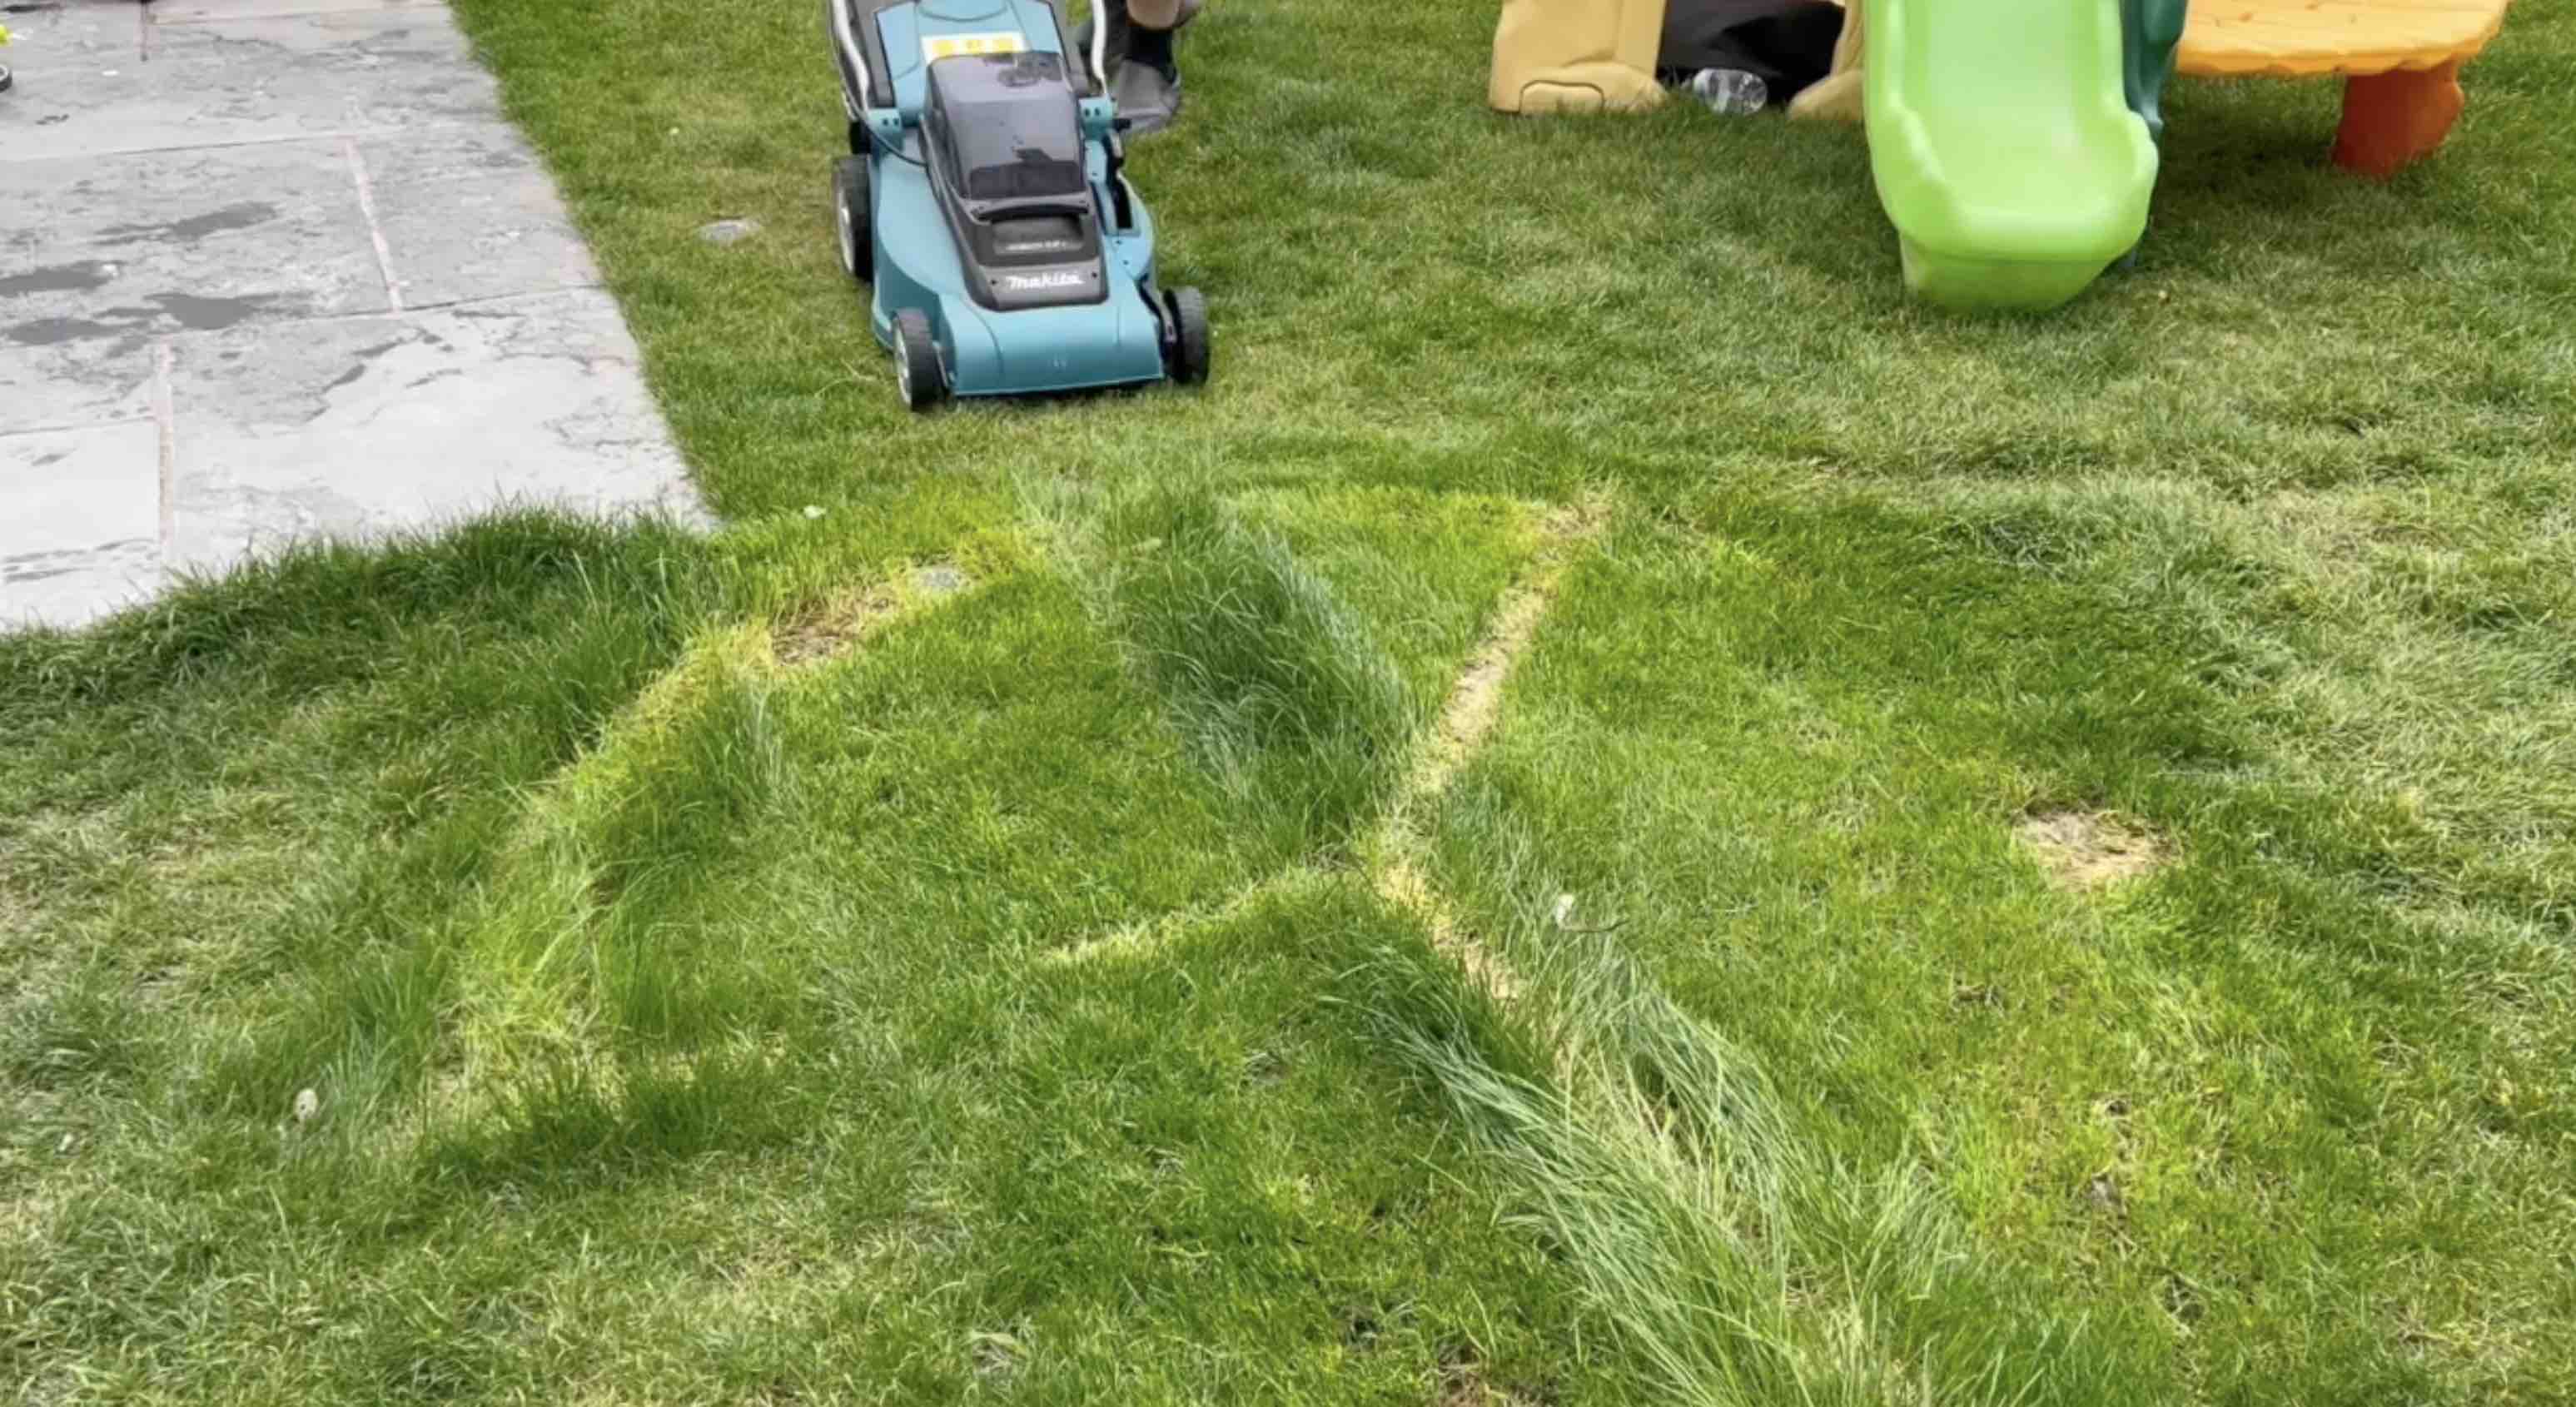 https://www.gardentoolbox.co.uk/wp-content/uploads/2022/05/Makita-DLM380Z-cordless-lawn-mower-dealing-with-thick-and-tall-grass-no-problem-long-gone-are-the-battery-problems.jpg